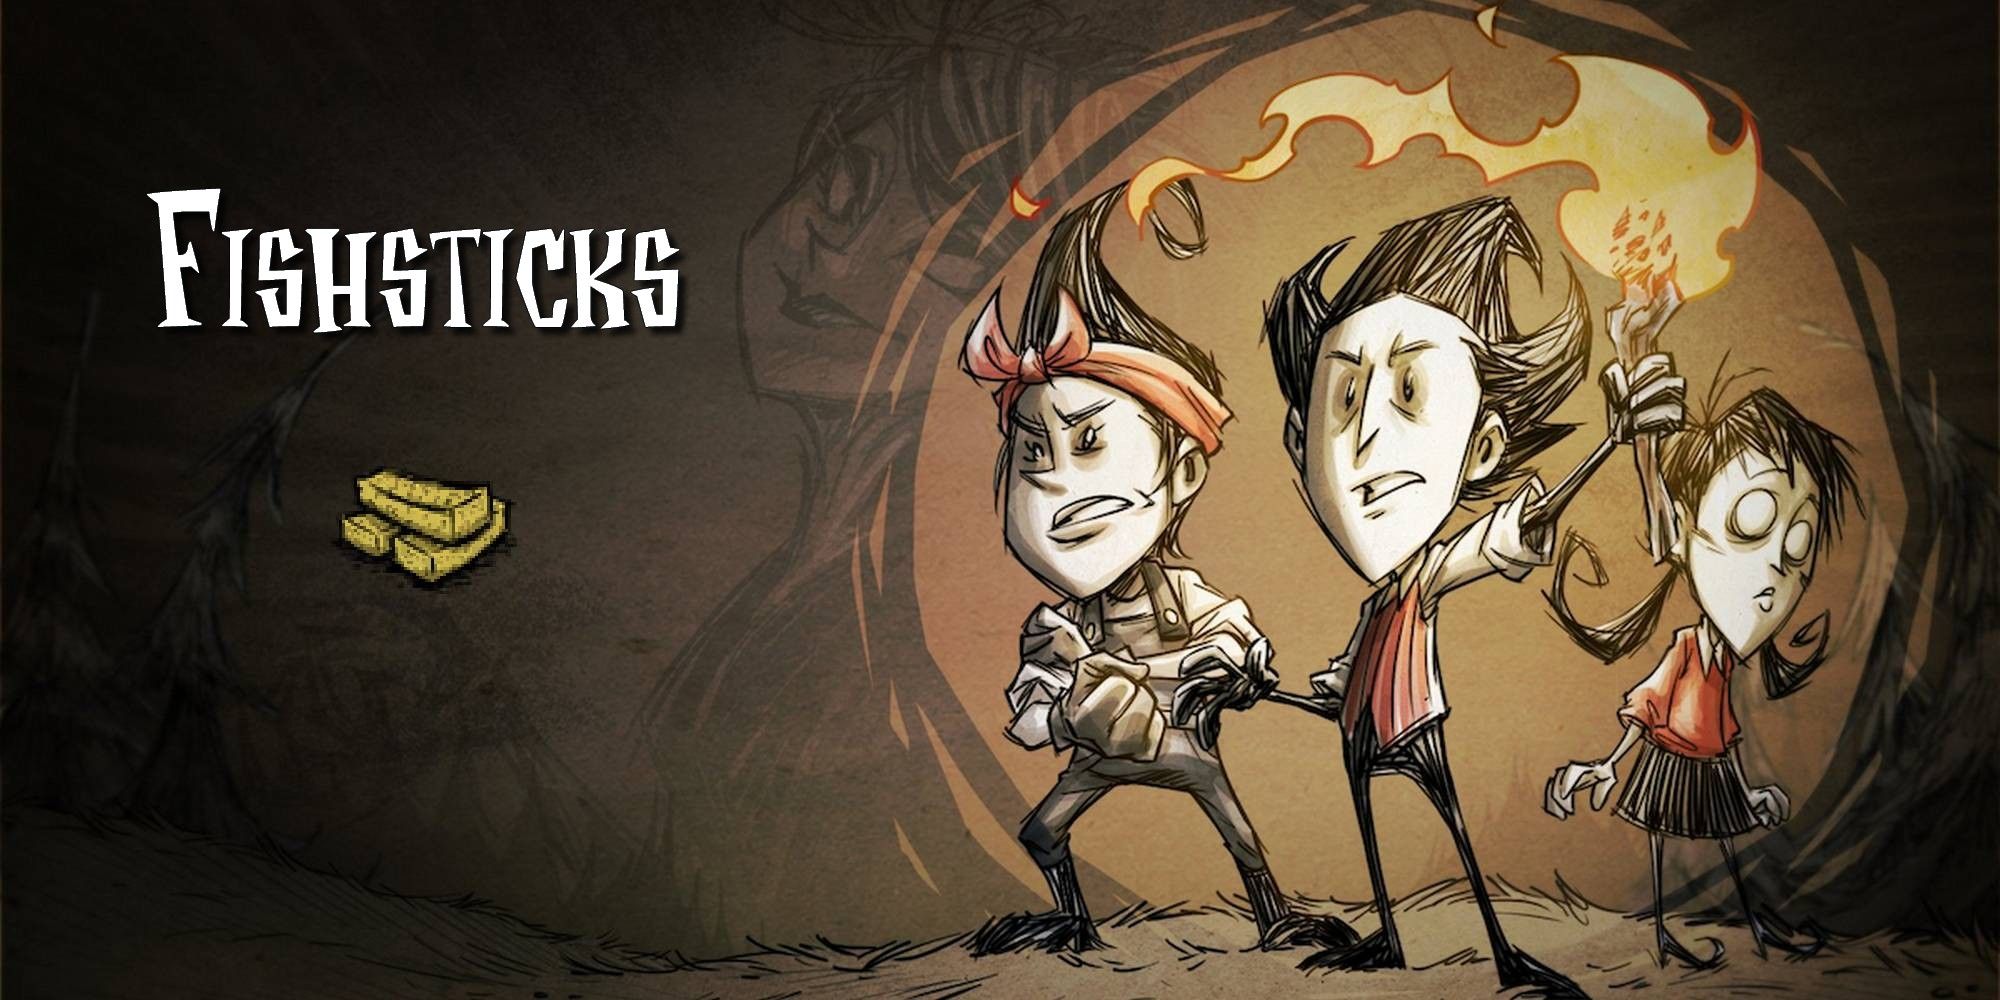 wilson willow don't starve together best recipes dst fishsticks